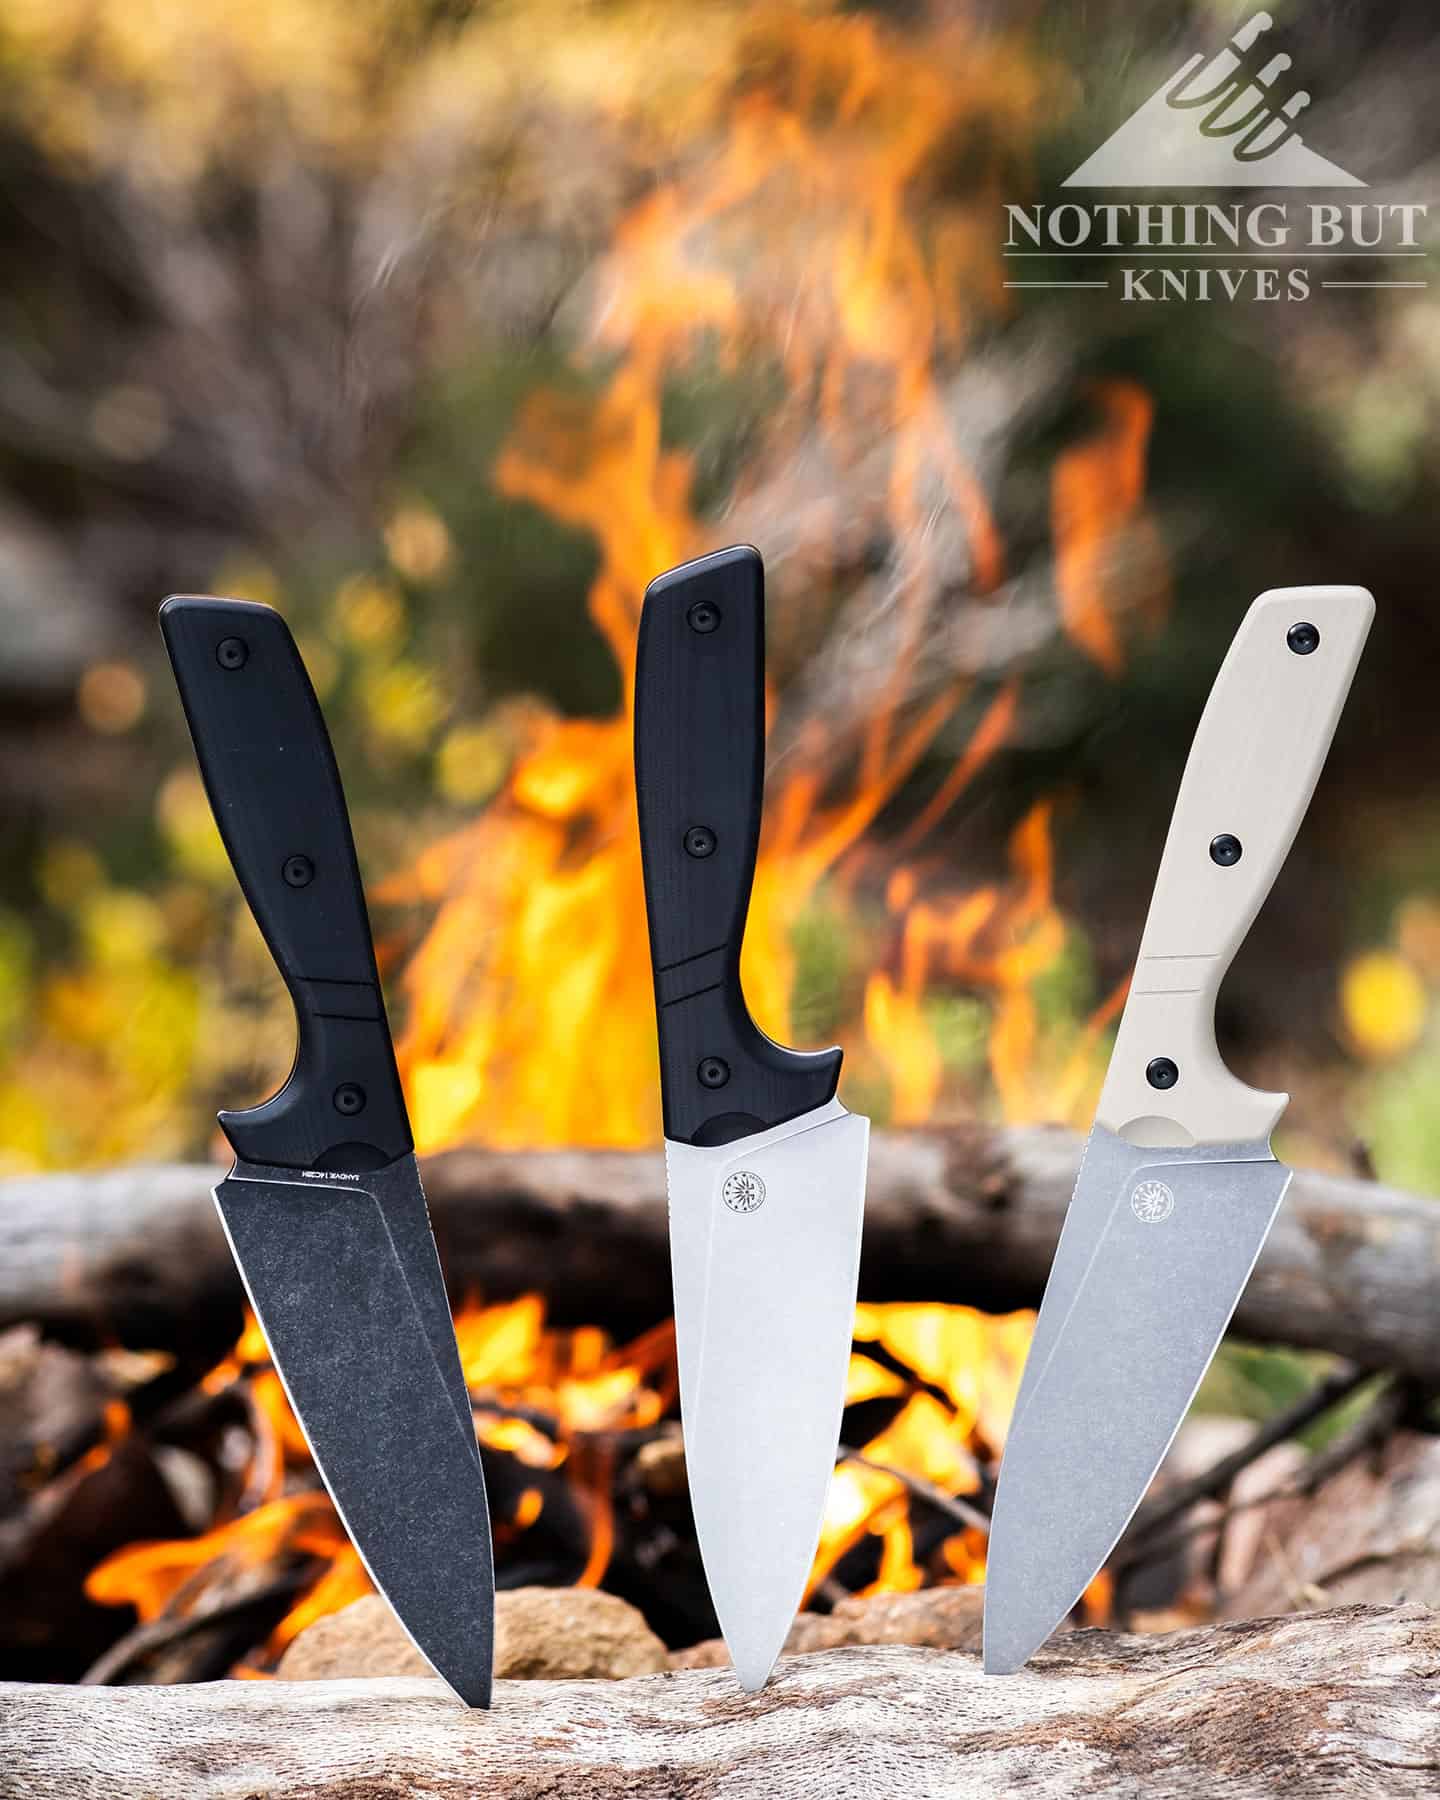 The Off-Grid Sierra comes in three different blade, handle and sheath color options. They are shown here from left to right: black handle and black anodized blade, back handle and a satin blade and coyote handle and a stonewashed blade.